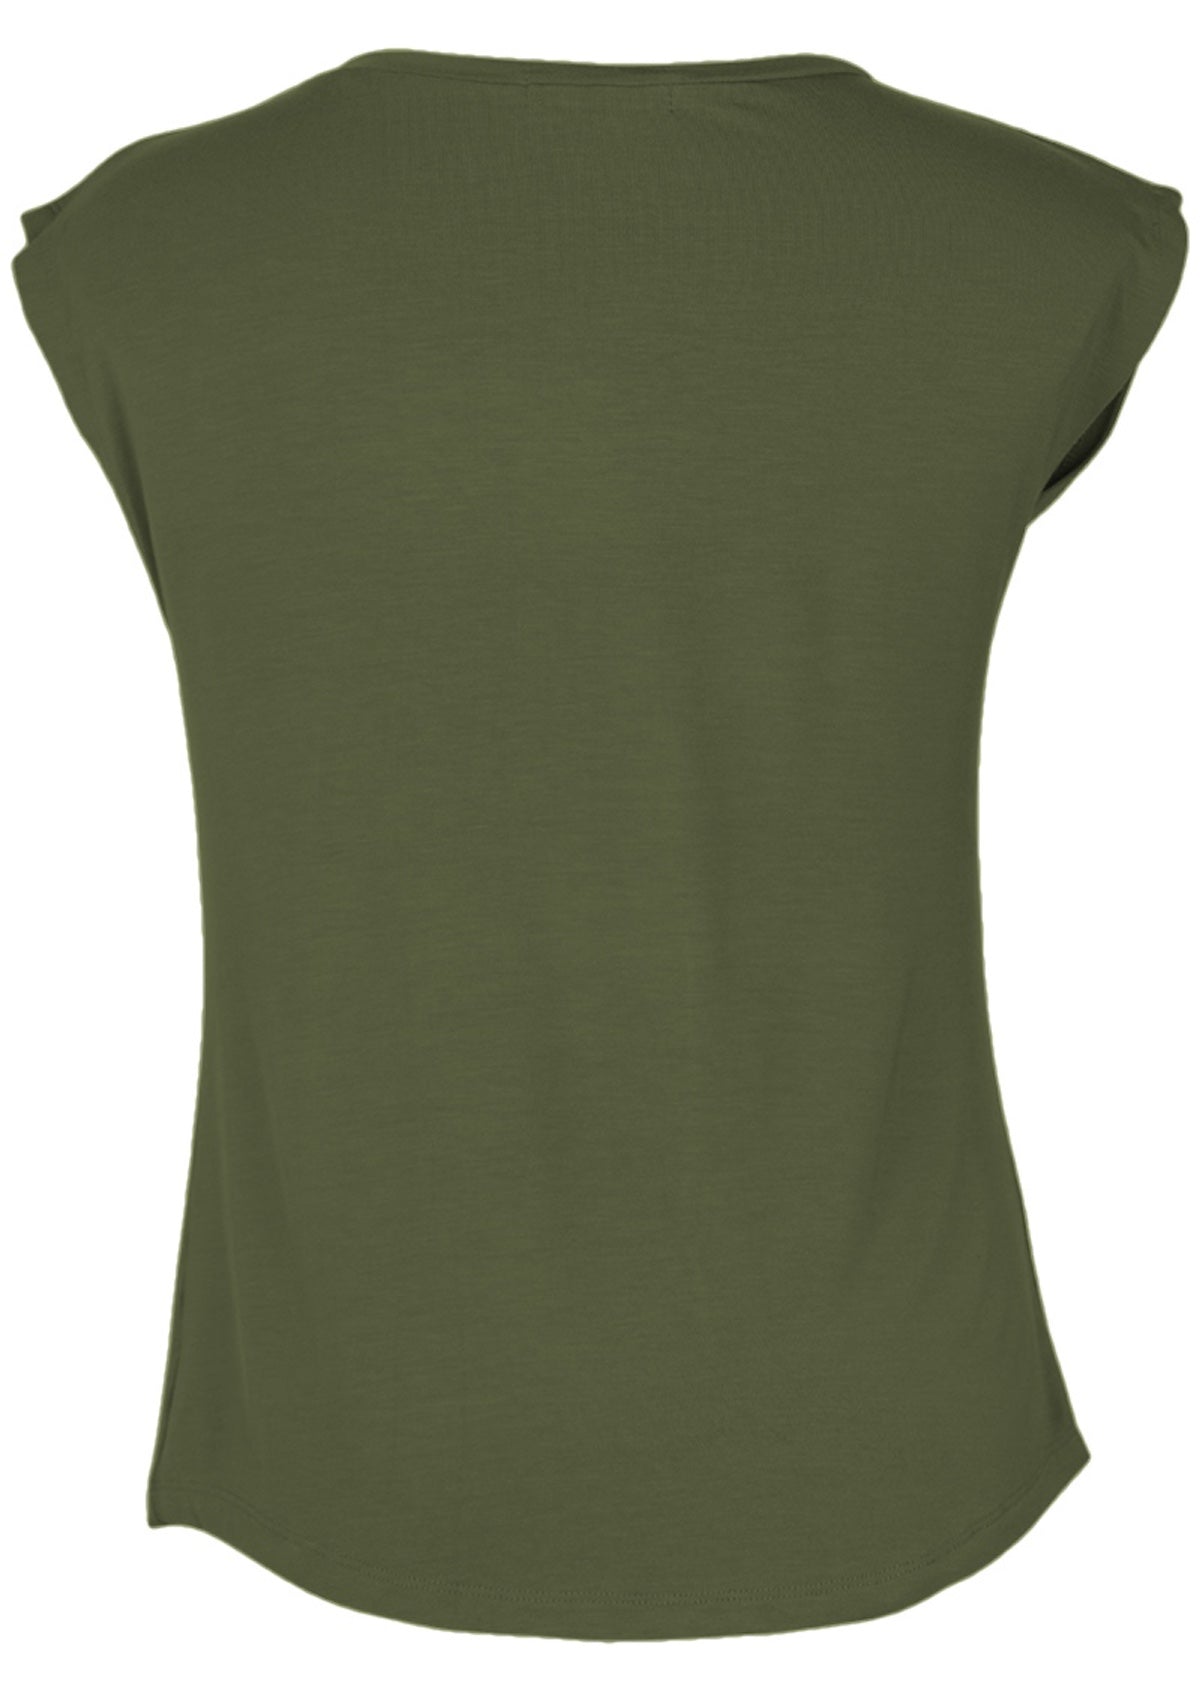 Back view of a women's olive green v-neck short cap sleeve rayon top